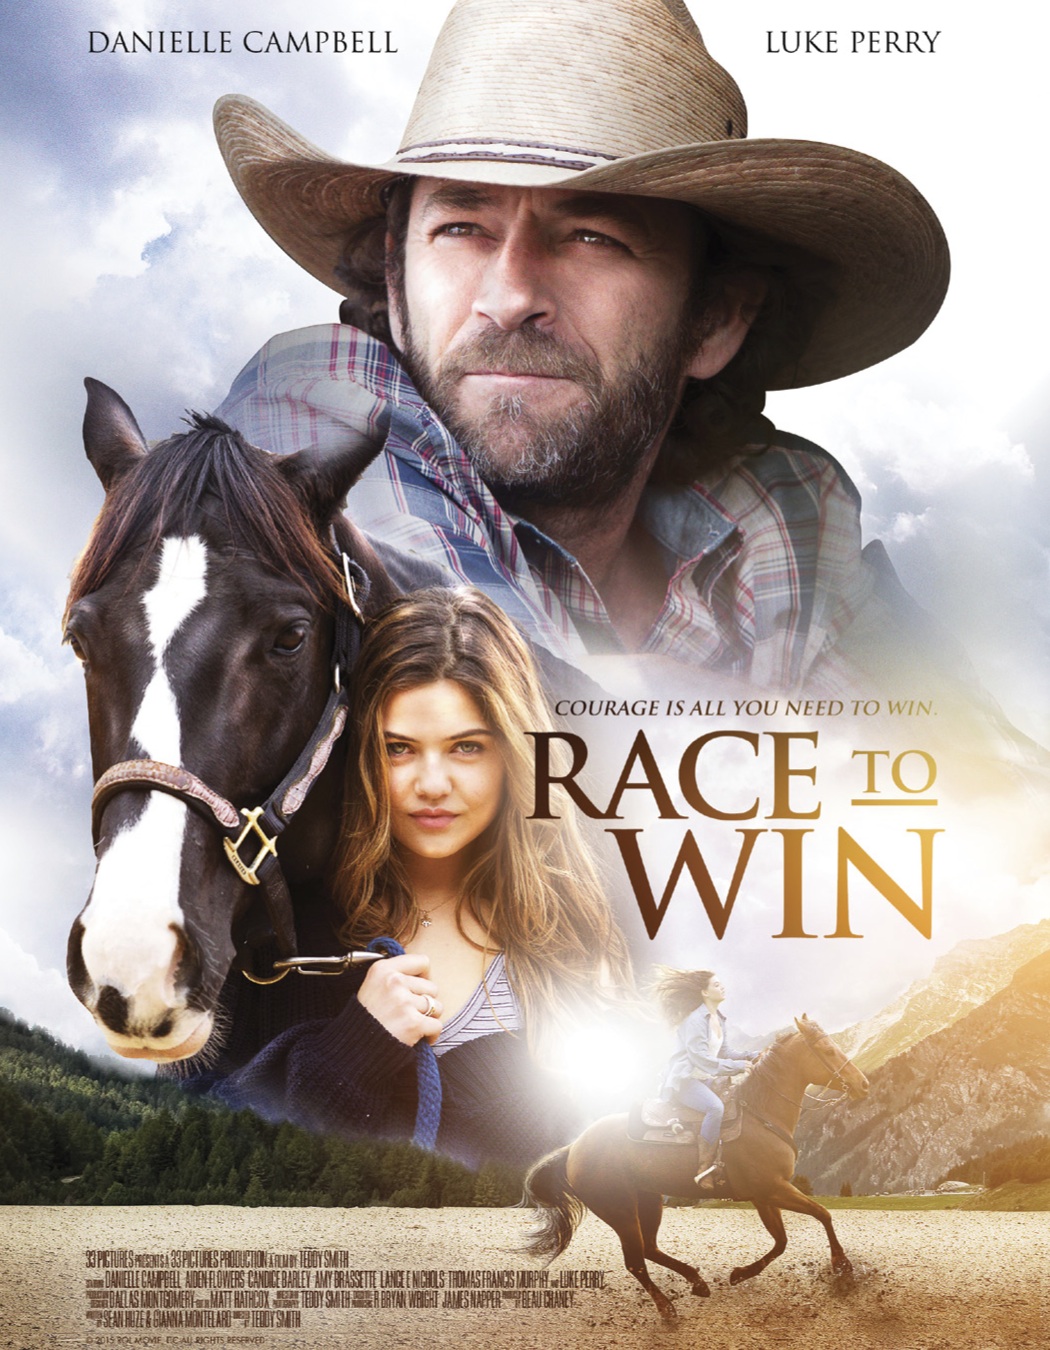 Race-to-Win-Movie-Poster.jpg